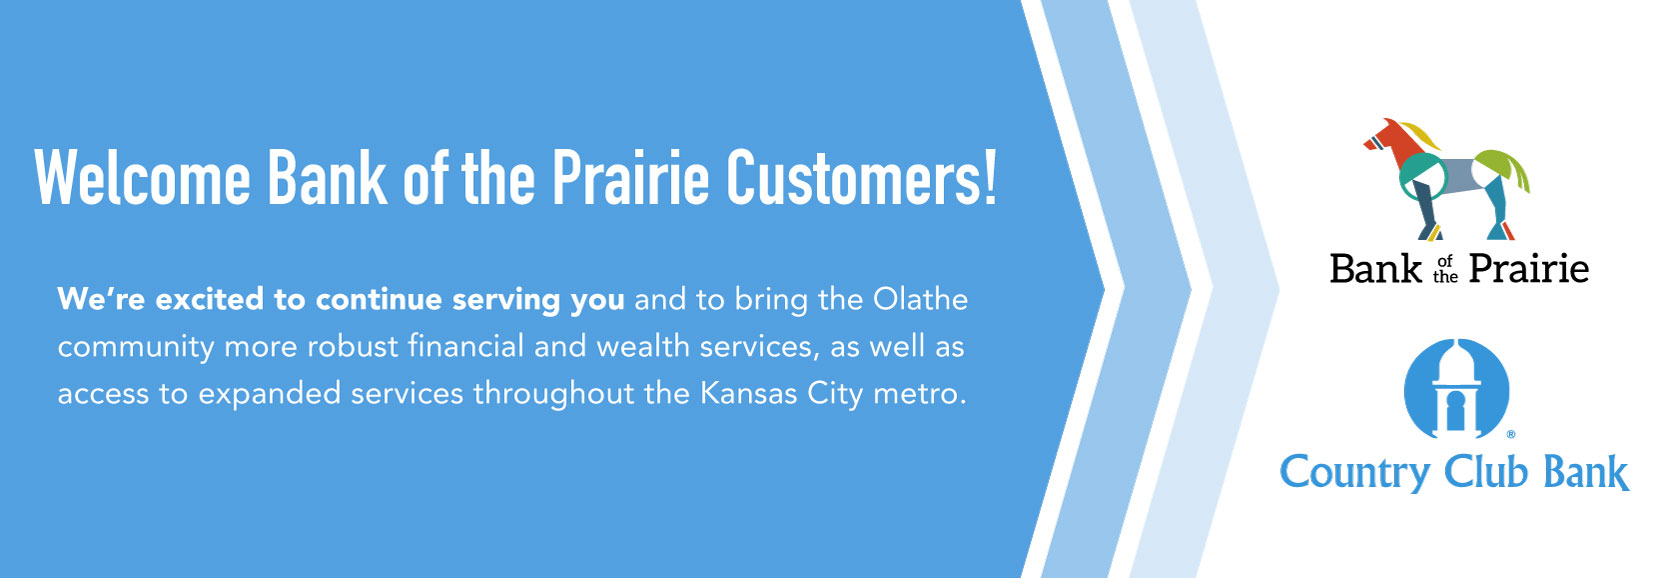 bank of the prairie has been acquired by ccb financial corporation